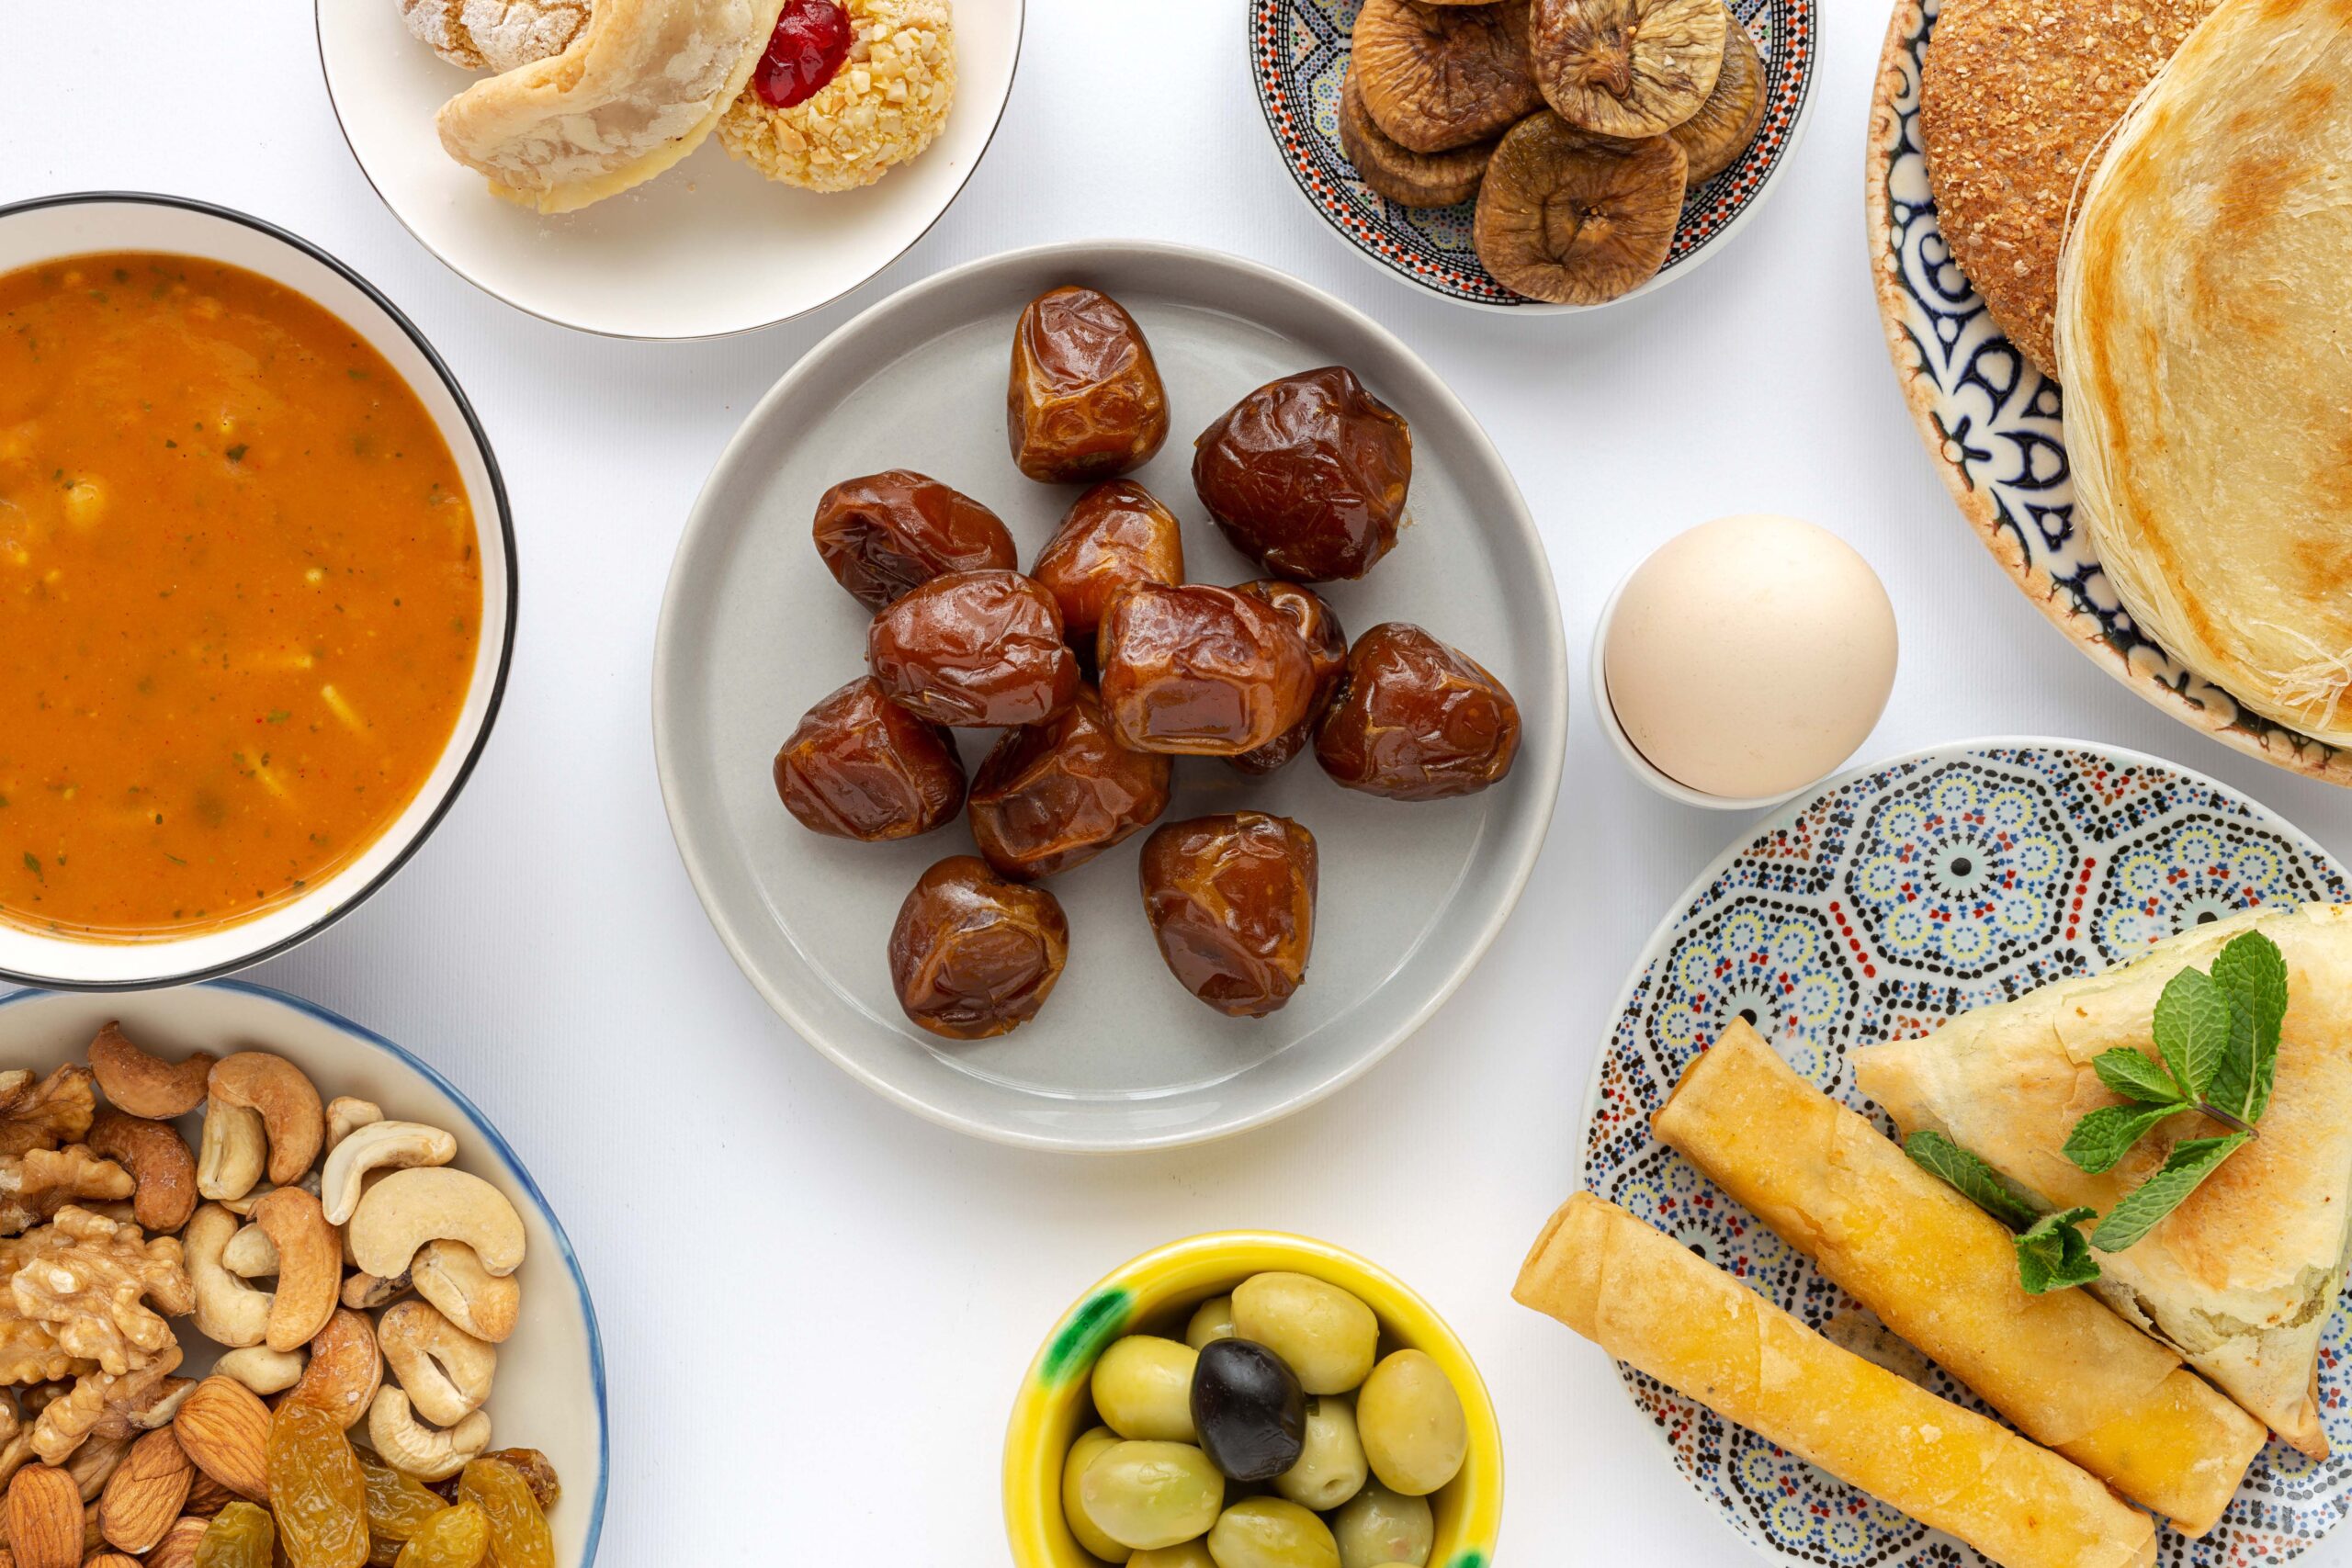 Table filled with various small ramadan dishes such as dates, harira, olives, and nuts.